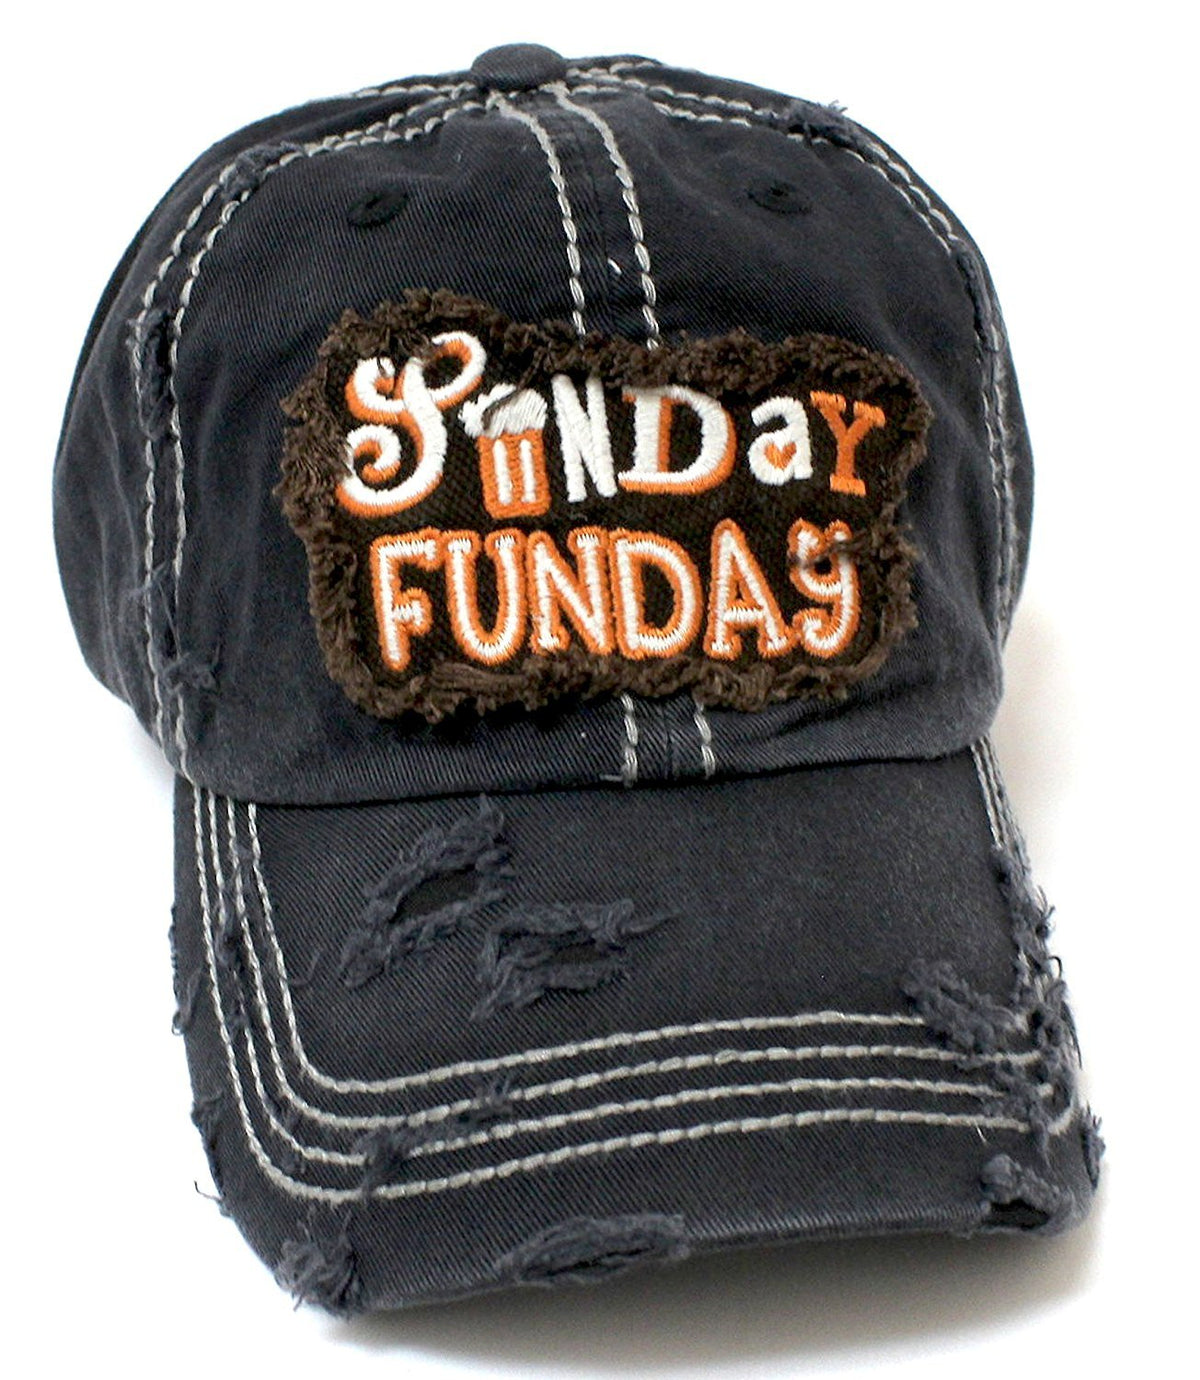 "SUNDAY FUNDAY" Patch Embroidery Vintage Baseball Hat - Caps 'N Vintage 